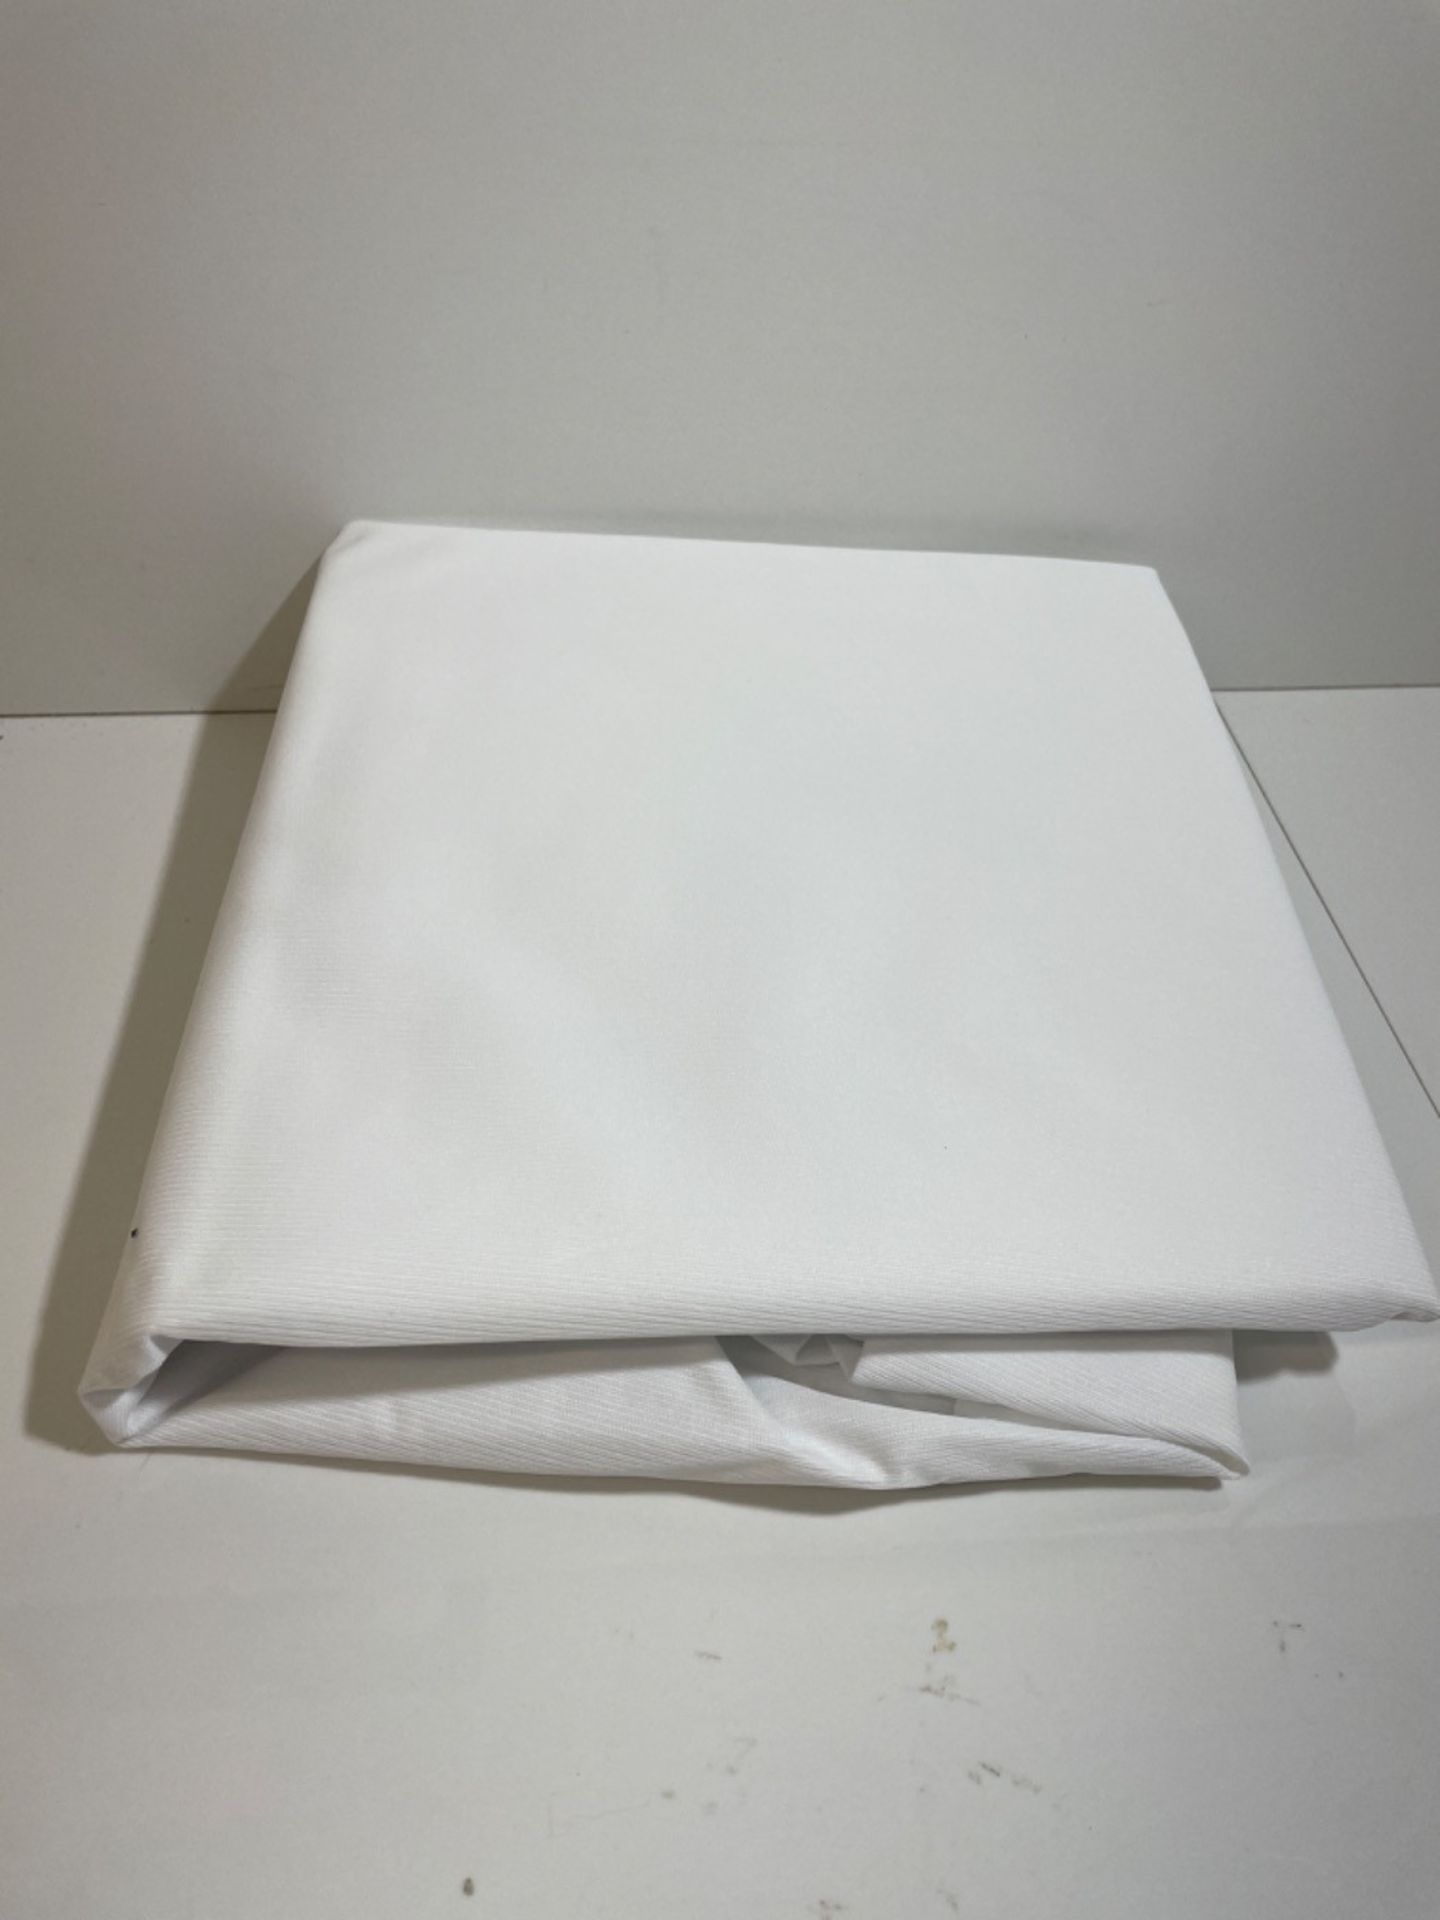 Velfont Anti-dust mite and Anti-bedbugs zipped mattress cover, waterproof and breathable | Anti-all - Image 3 of 3